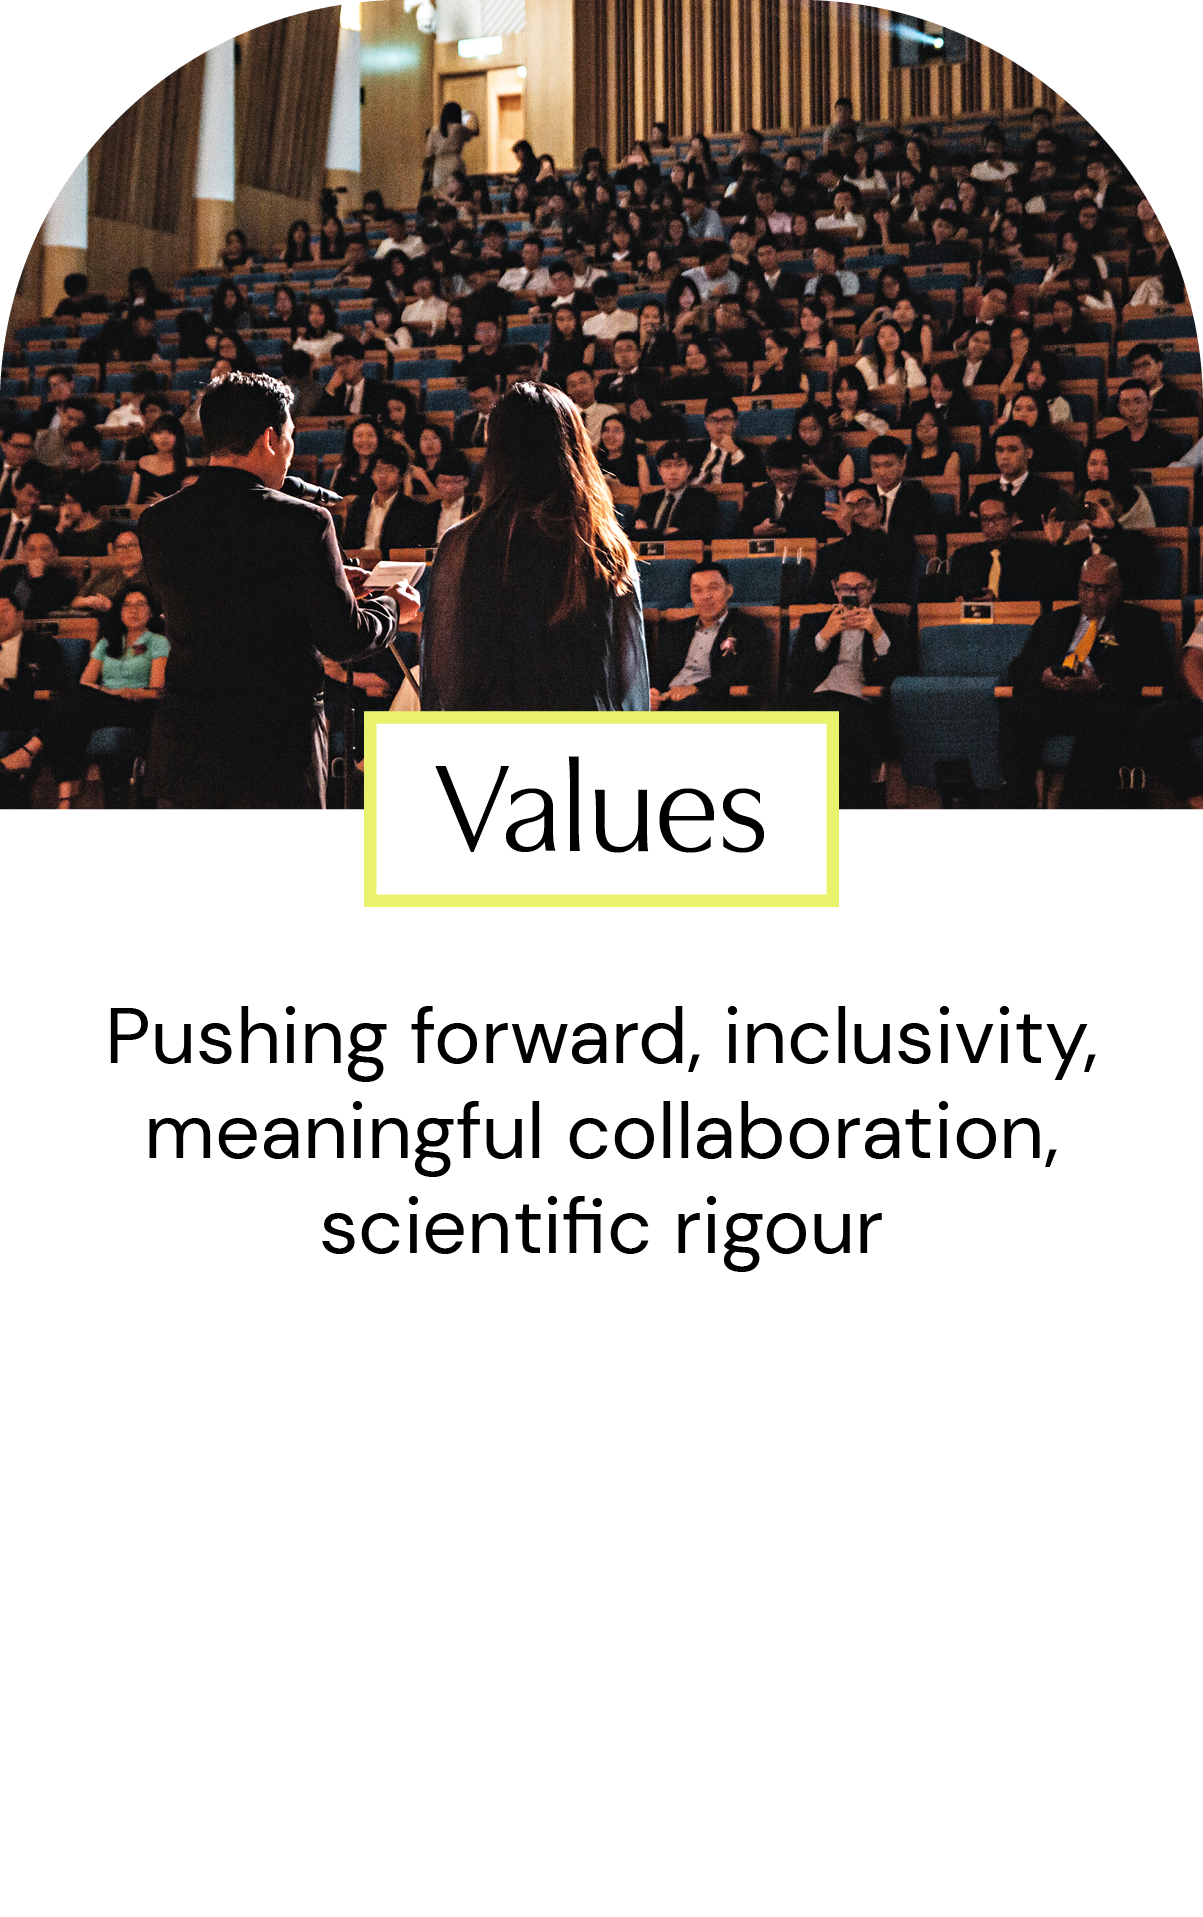 Values infographic 3.png